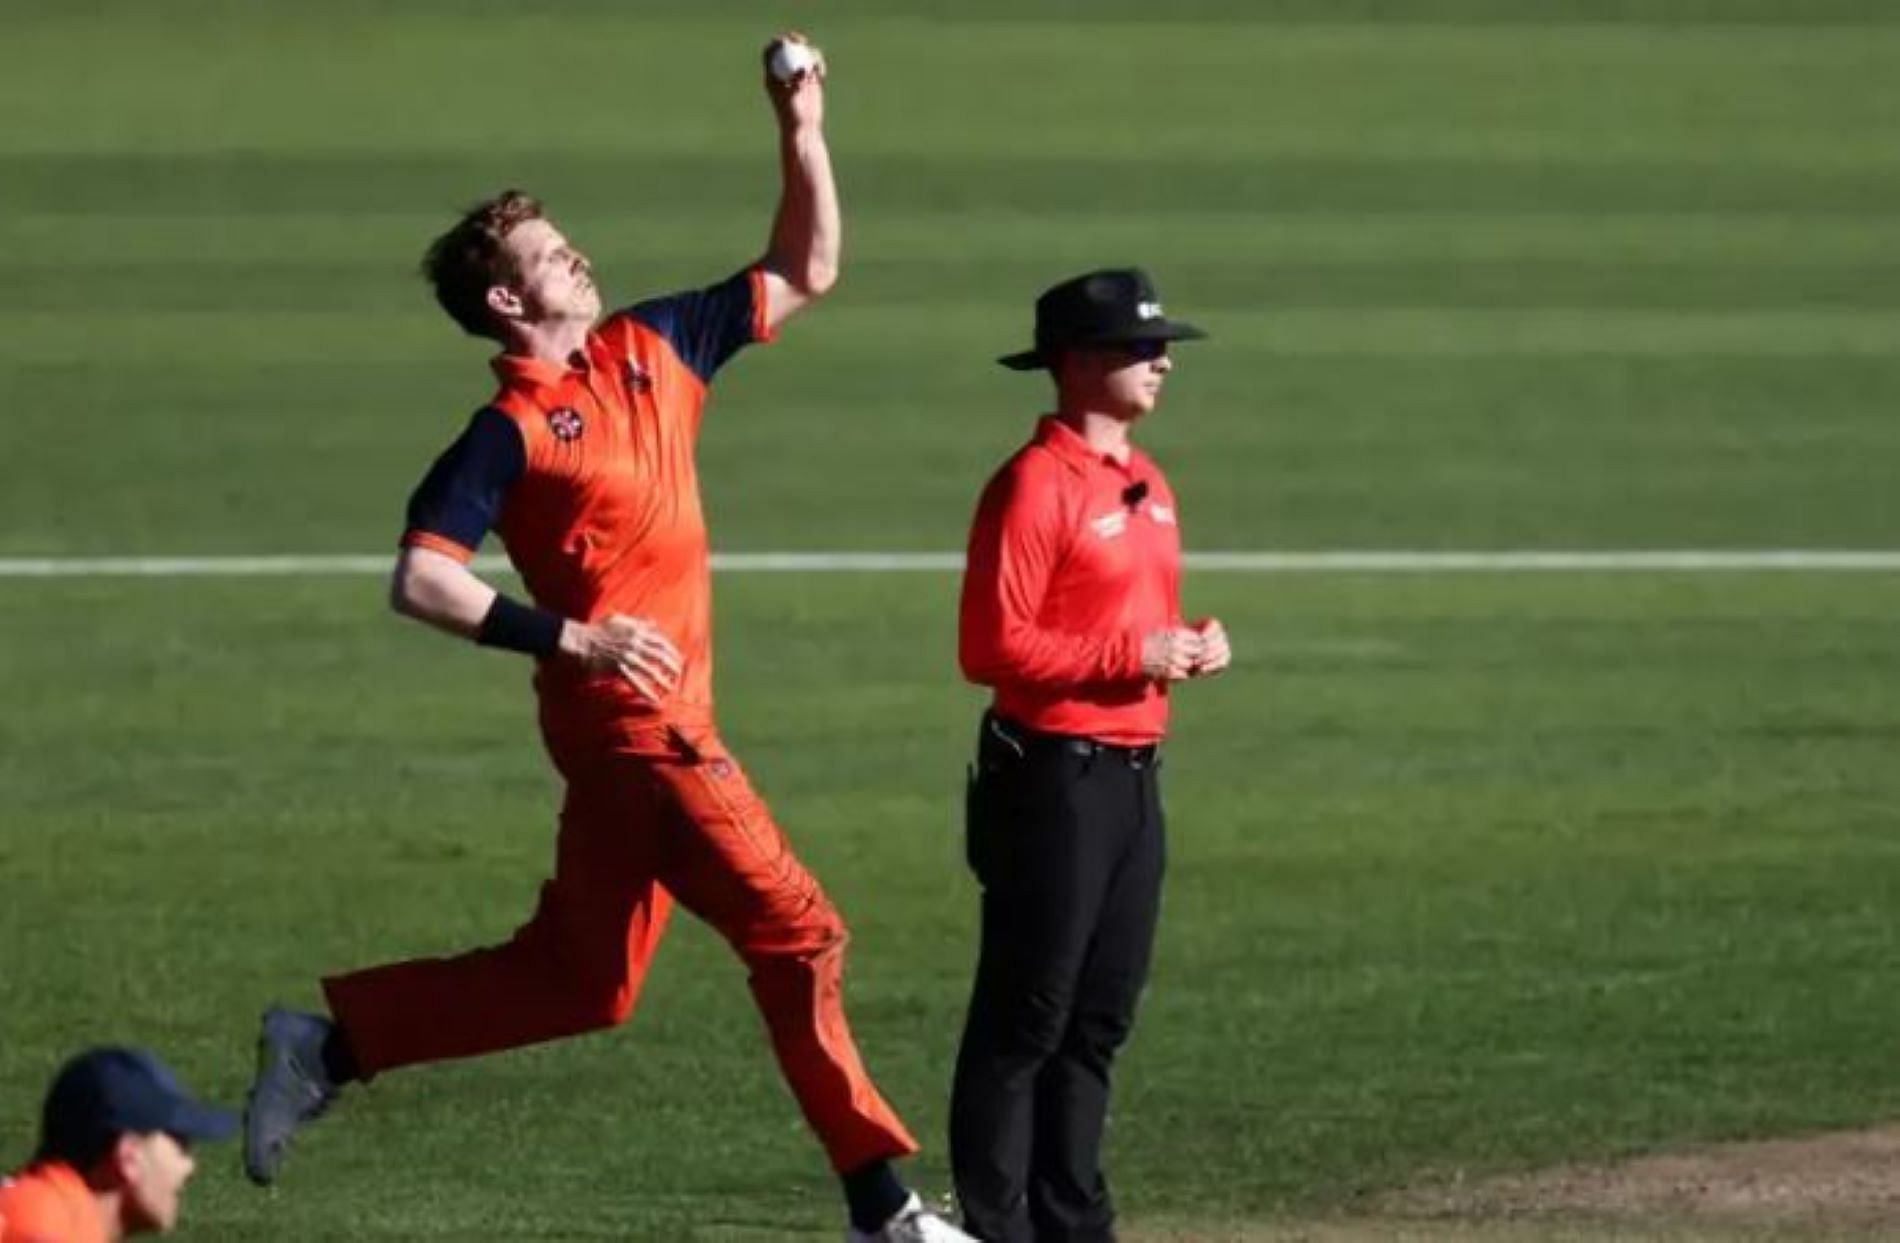 Klaassen starred for the Netherlands in the 2021 and 2022 T20 World Cup.